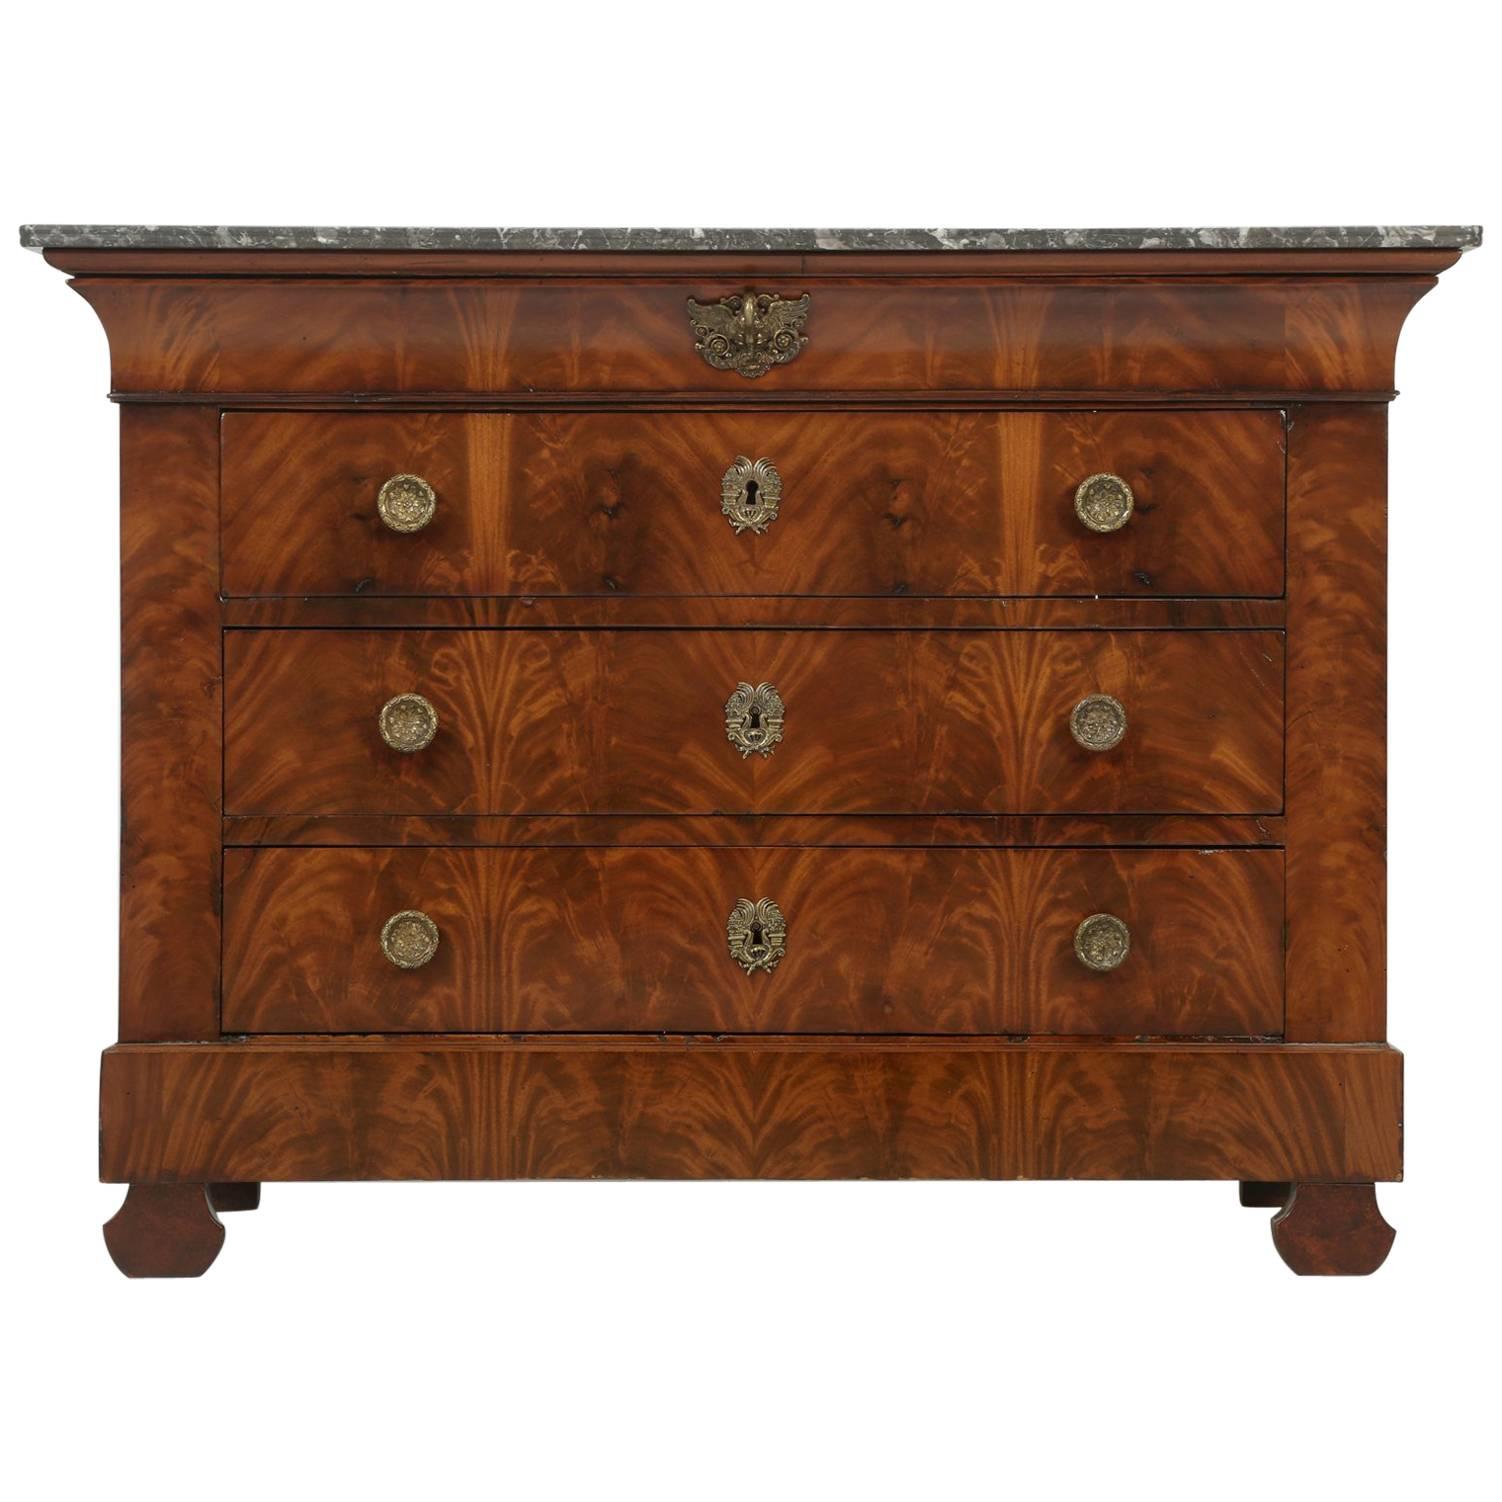 Antique French Commode in Mahogany with Exquisite Hardware